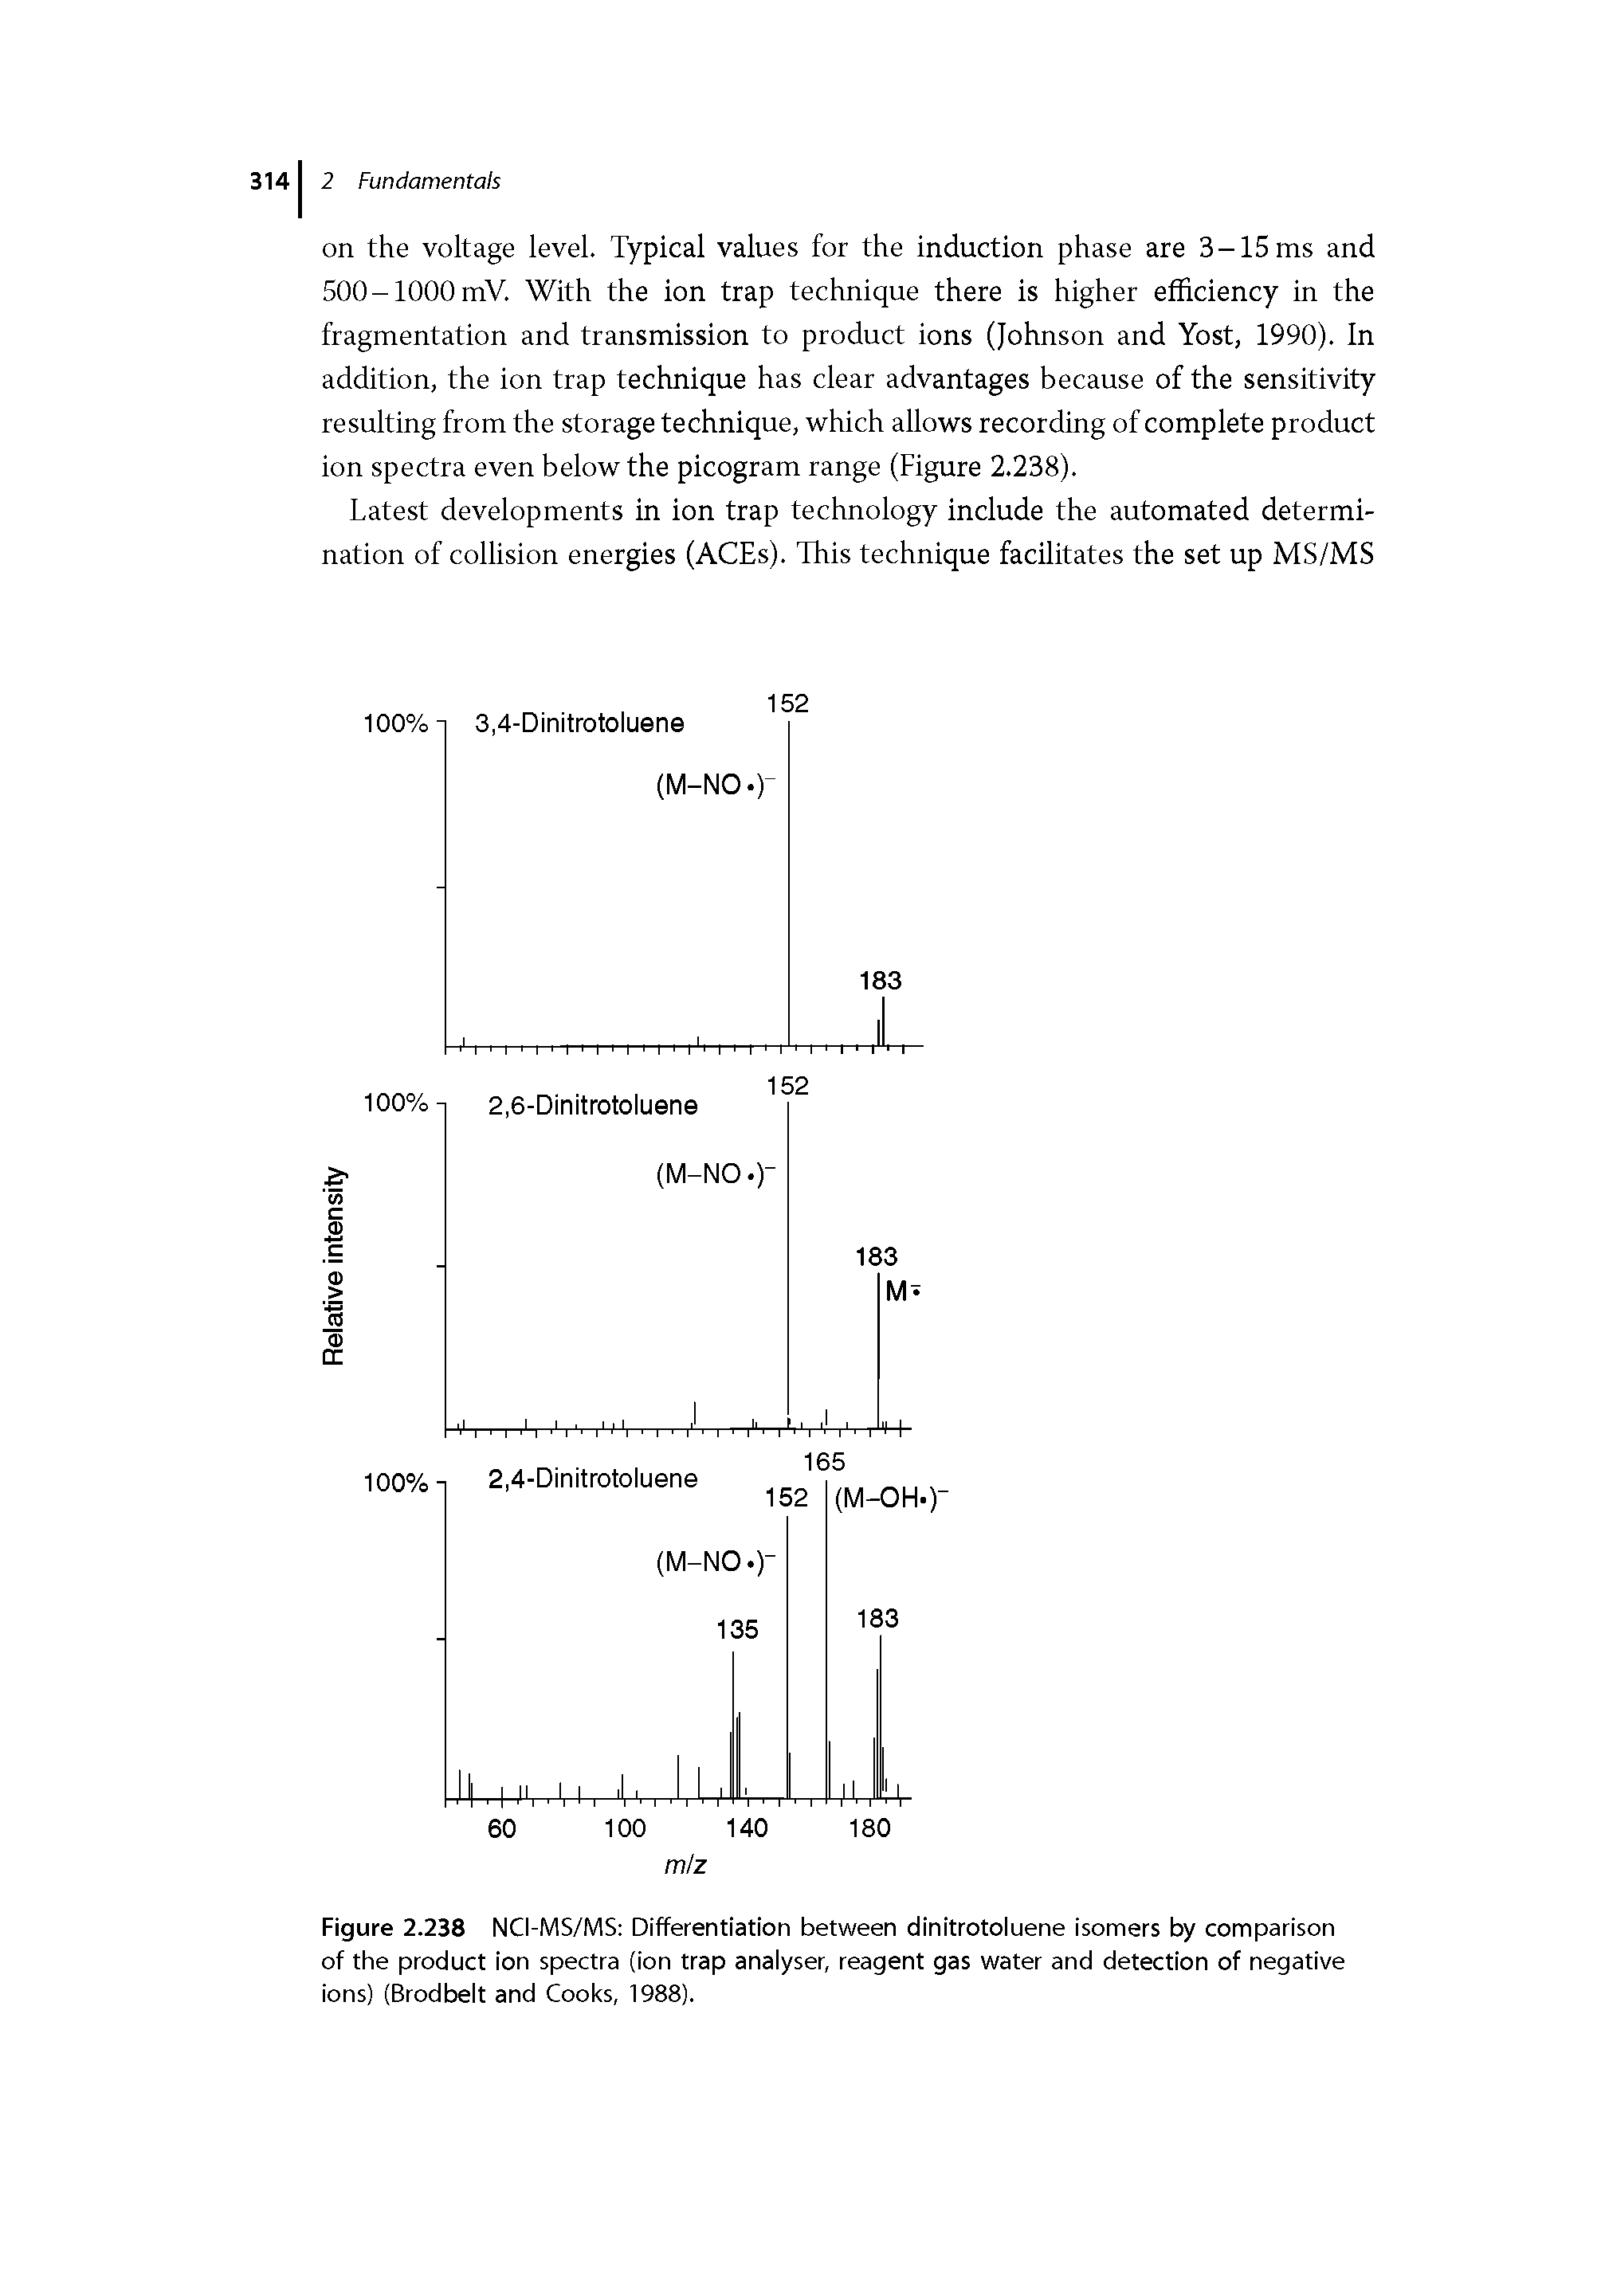 Figure 2.238 NCI-MS/MS Differentiation between dinitrotoluene isomers by comparison of the product ion spectra (ion trap analyser, reagent gas water and detection of negative ions) (Brodbelt and Cooks, 1988).